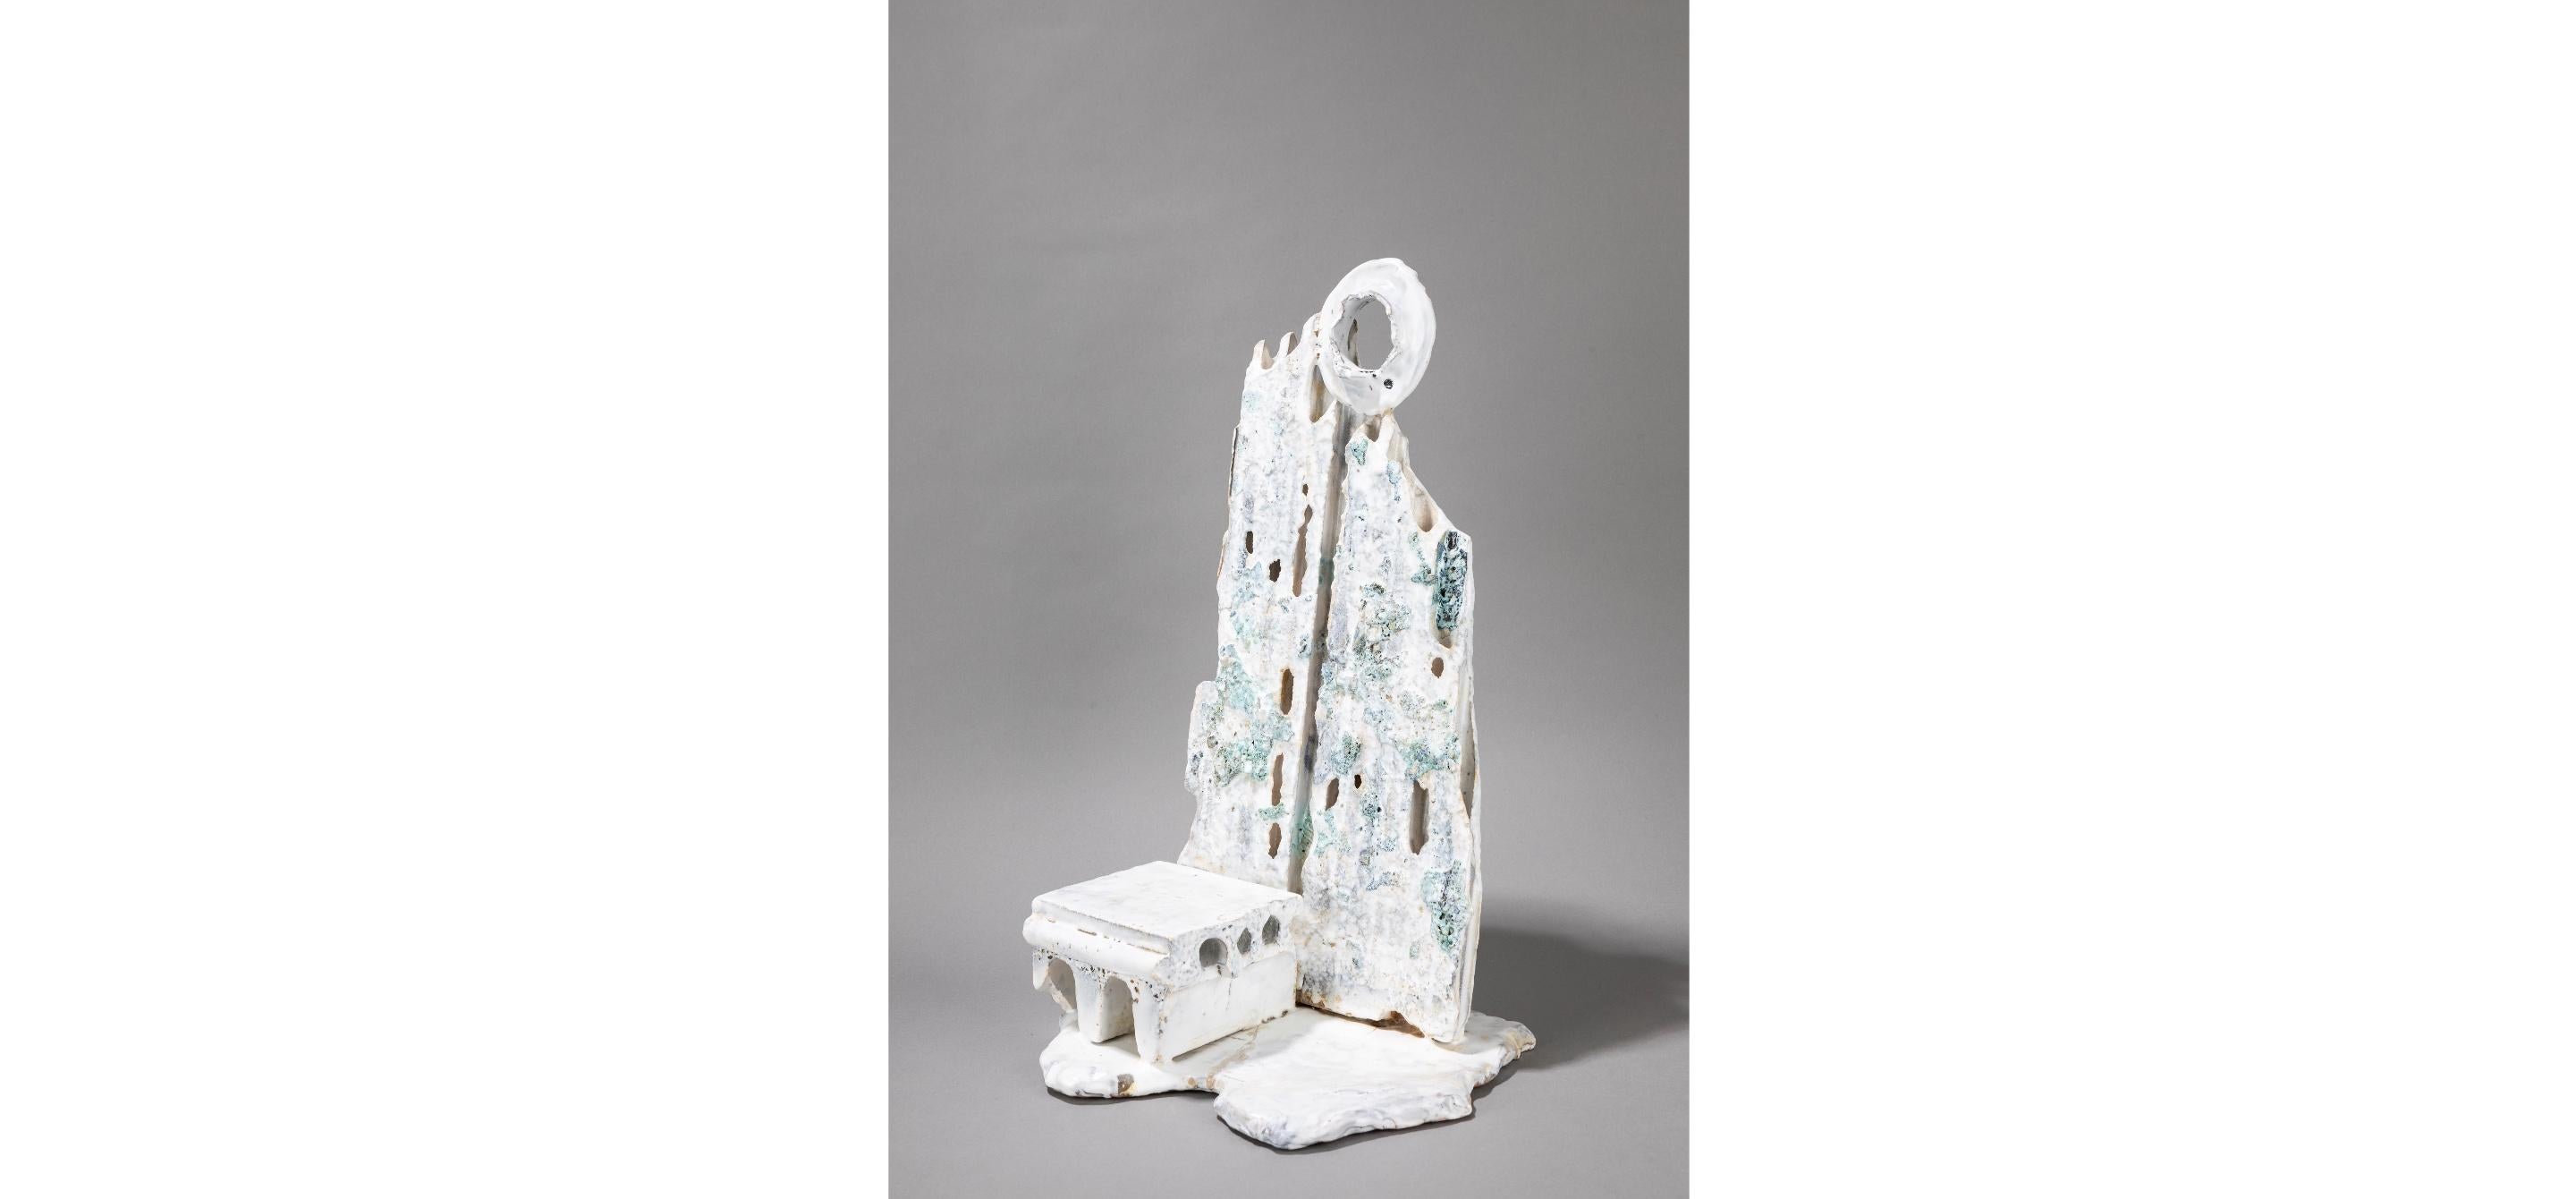 Ceramic sculpture by Marcello Fantoni, 1950.
Glazed ceramic. Single piece. Original signature. Cooking defect.

Biography
Marcello Fantoni was born in Florence on October 1, 1915. Growing up, he became passionate about art, and therefore enrolled in